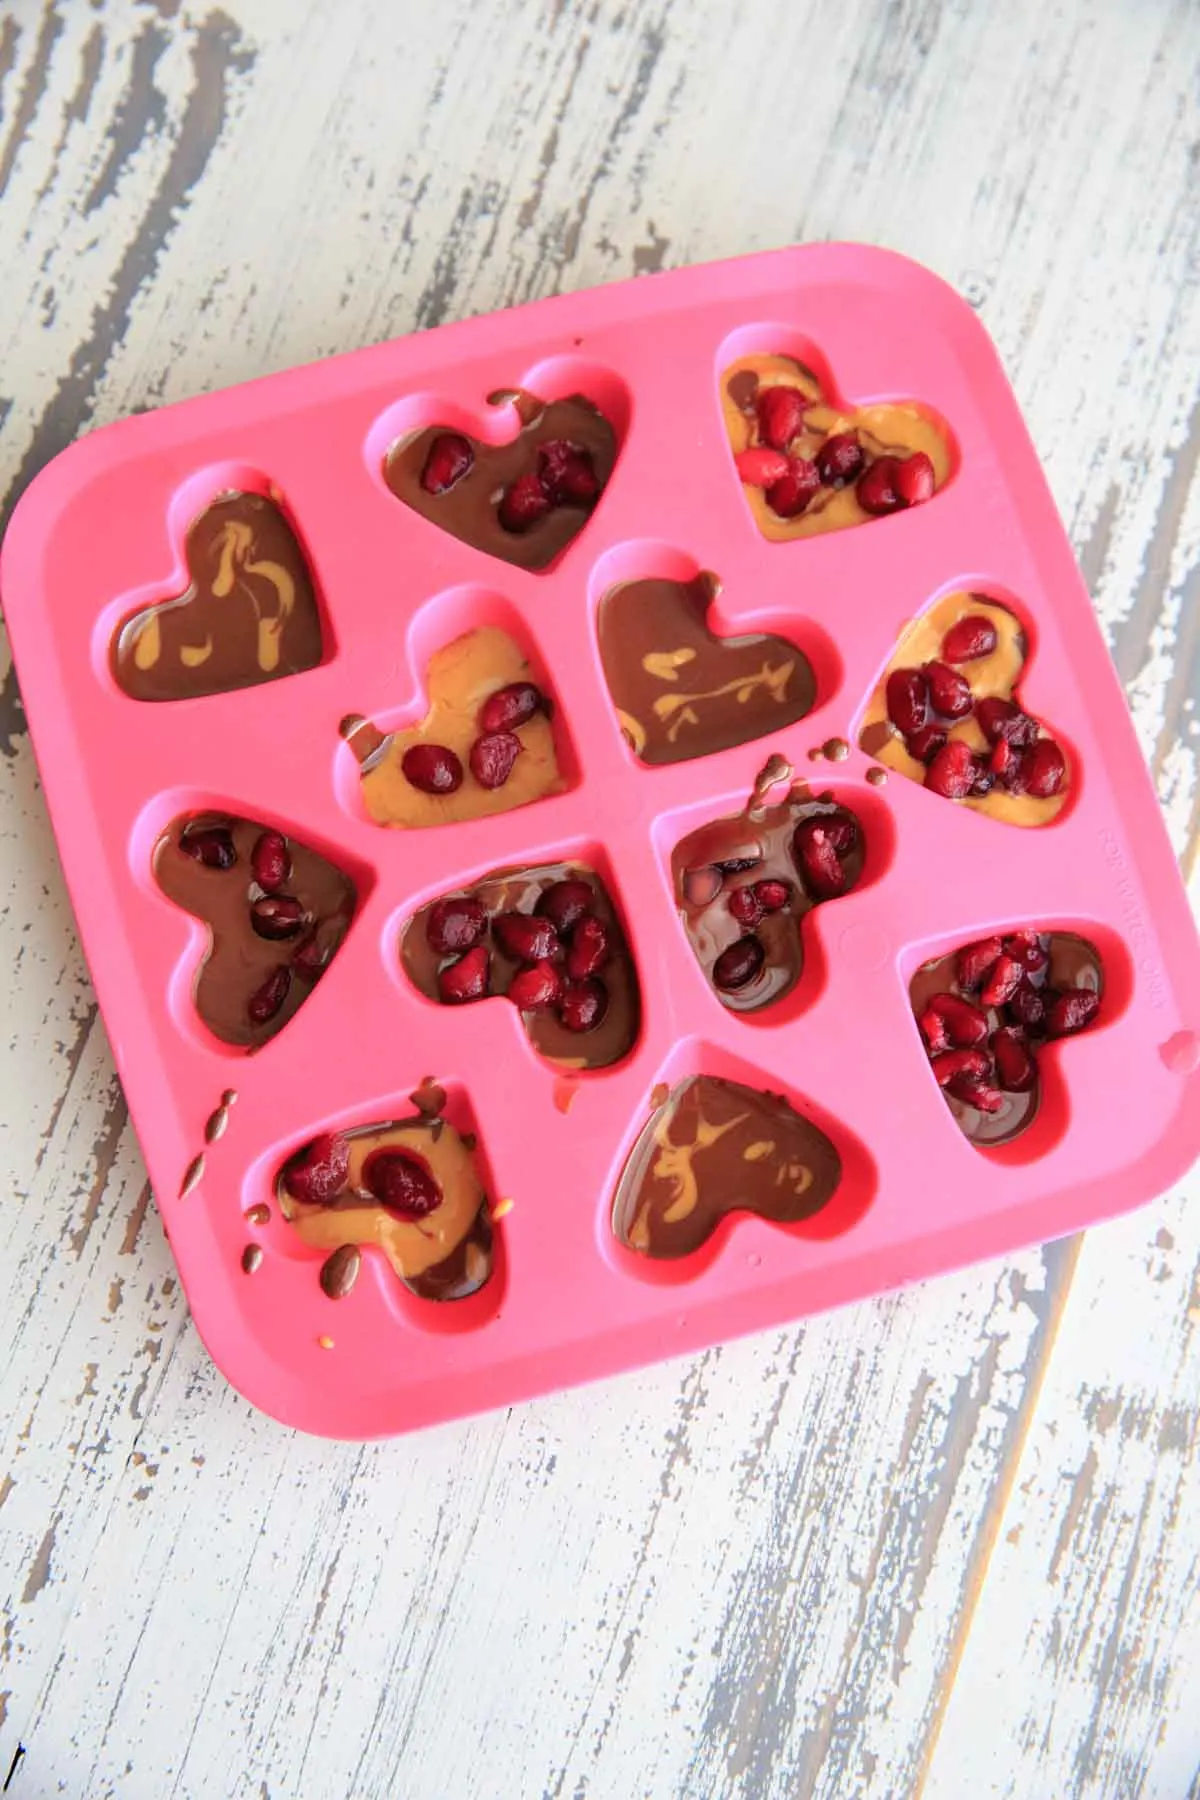 Chocolate Pomegranate Candy Recipe - melted chocolate peanut butter with pomegranate seeds